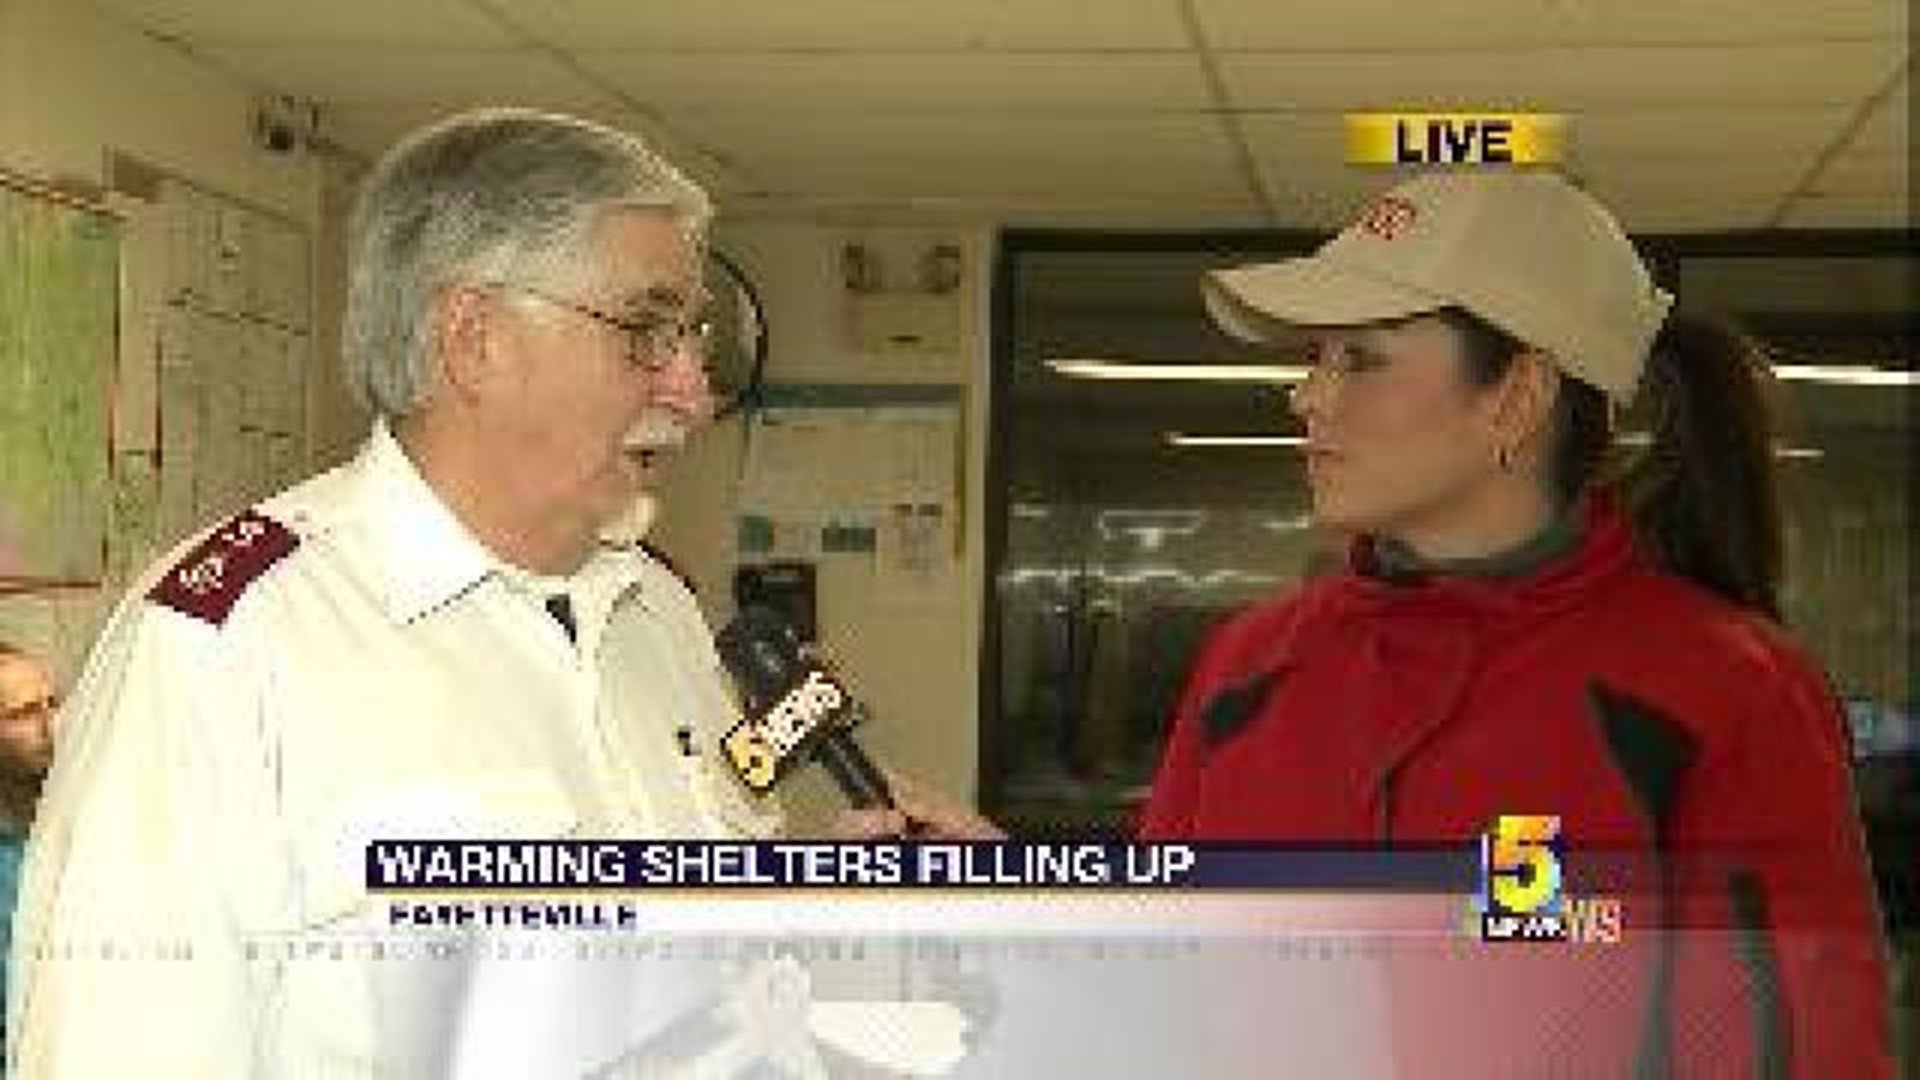 Salvation Army Warming Shelters Helping Those in Need